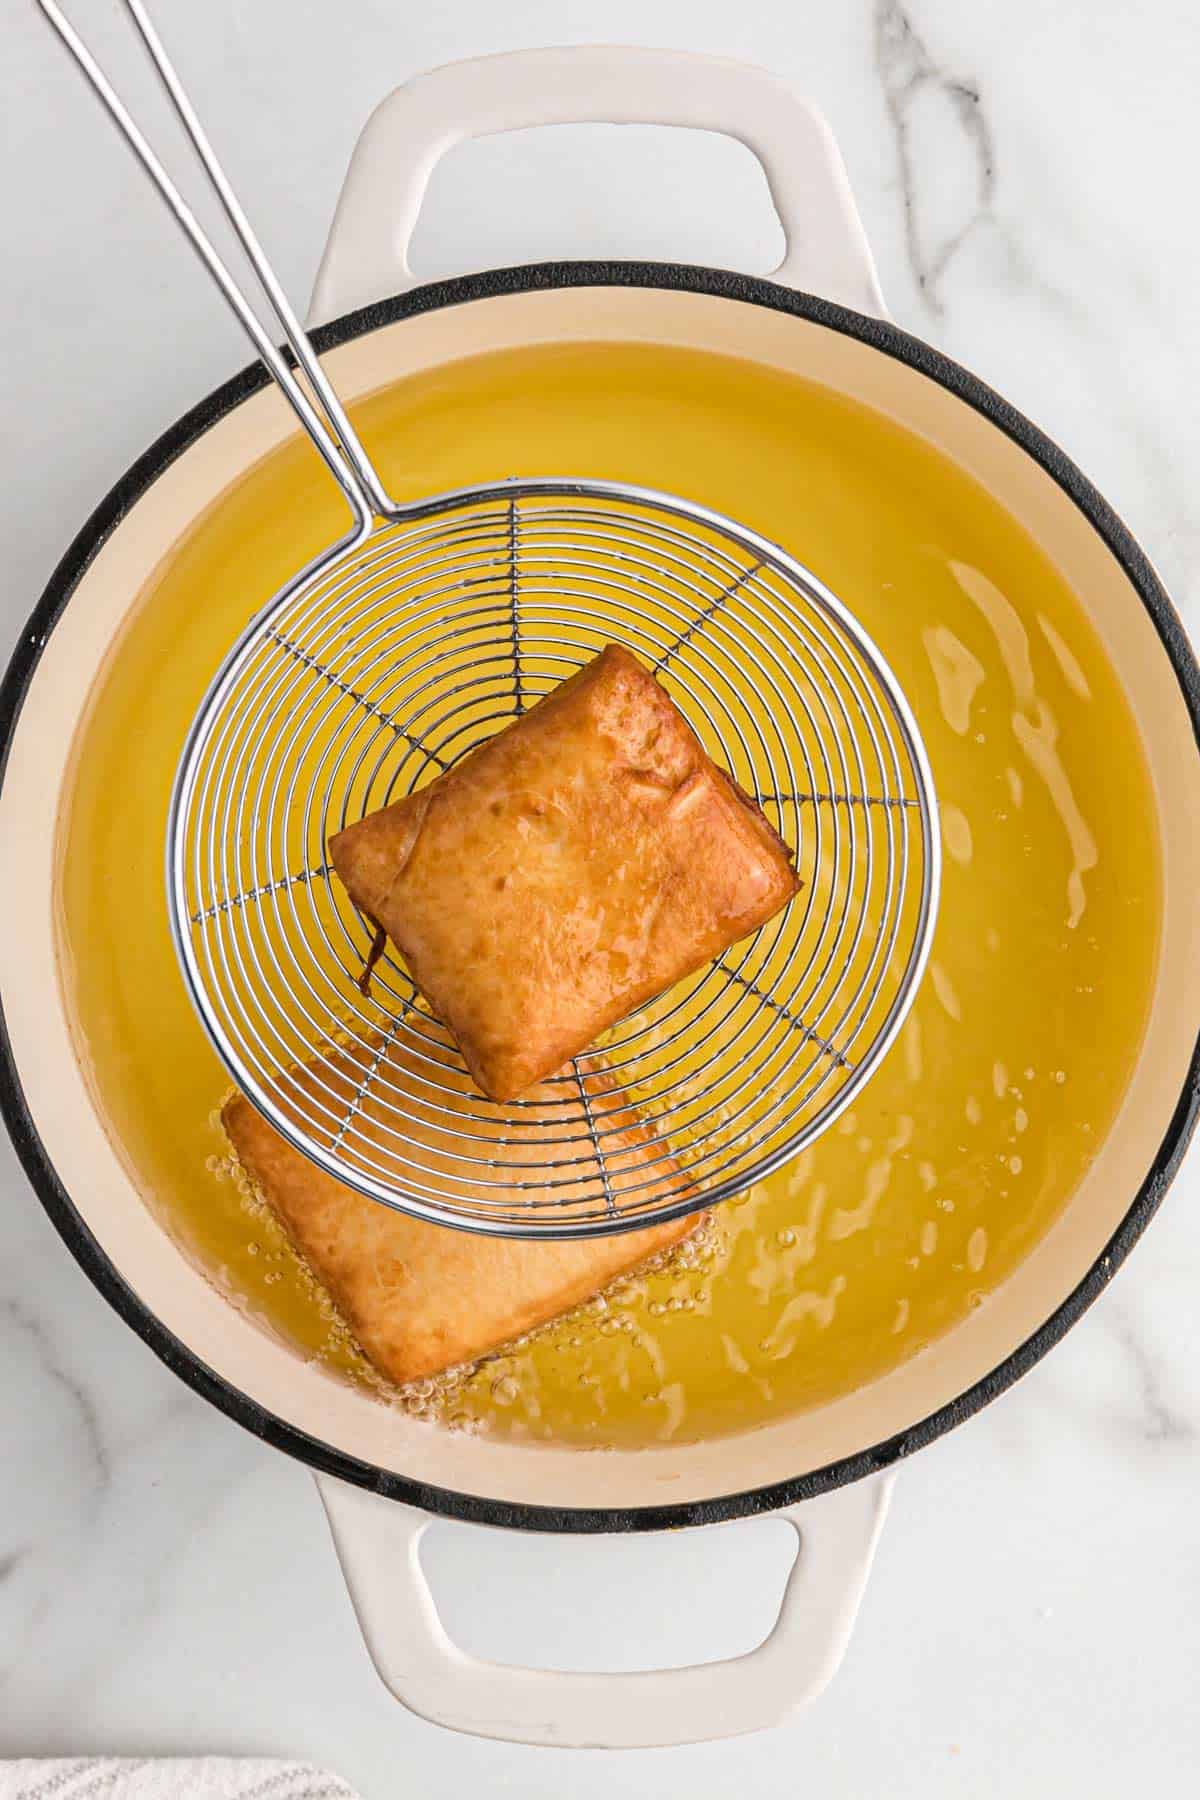 Scooping out a golden brown beignets from the pot.